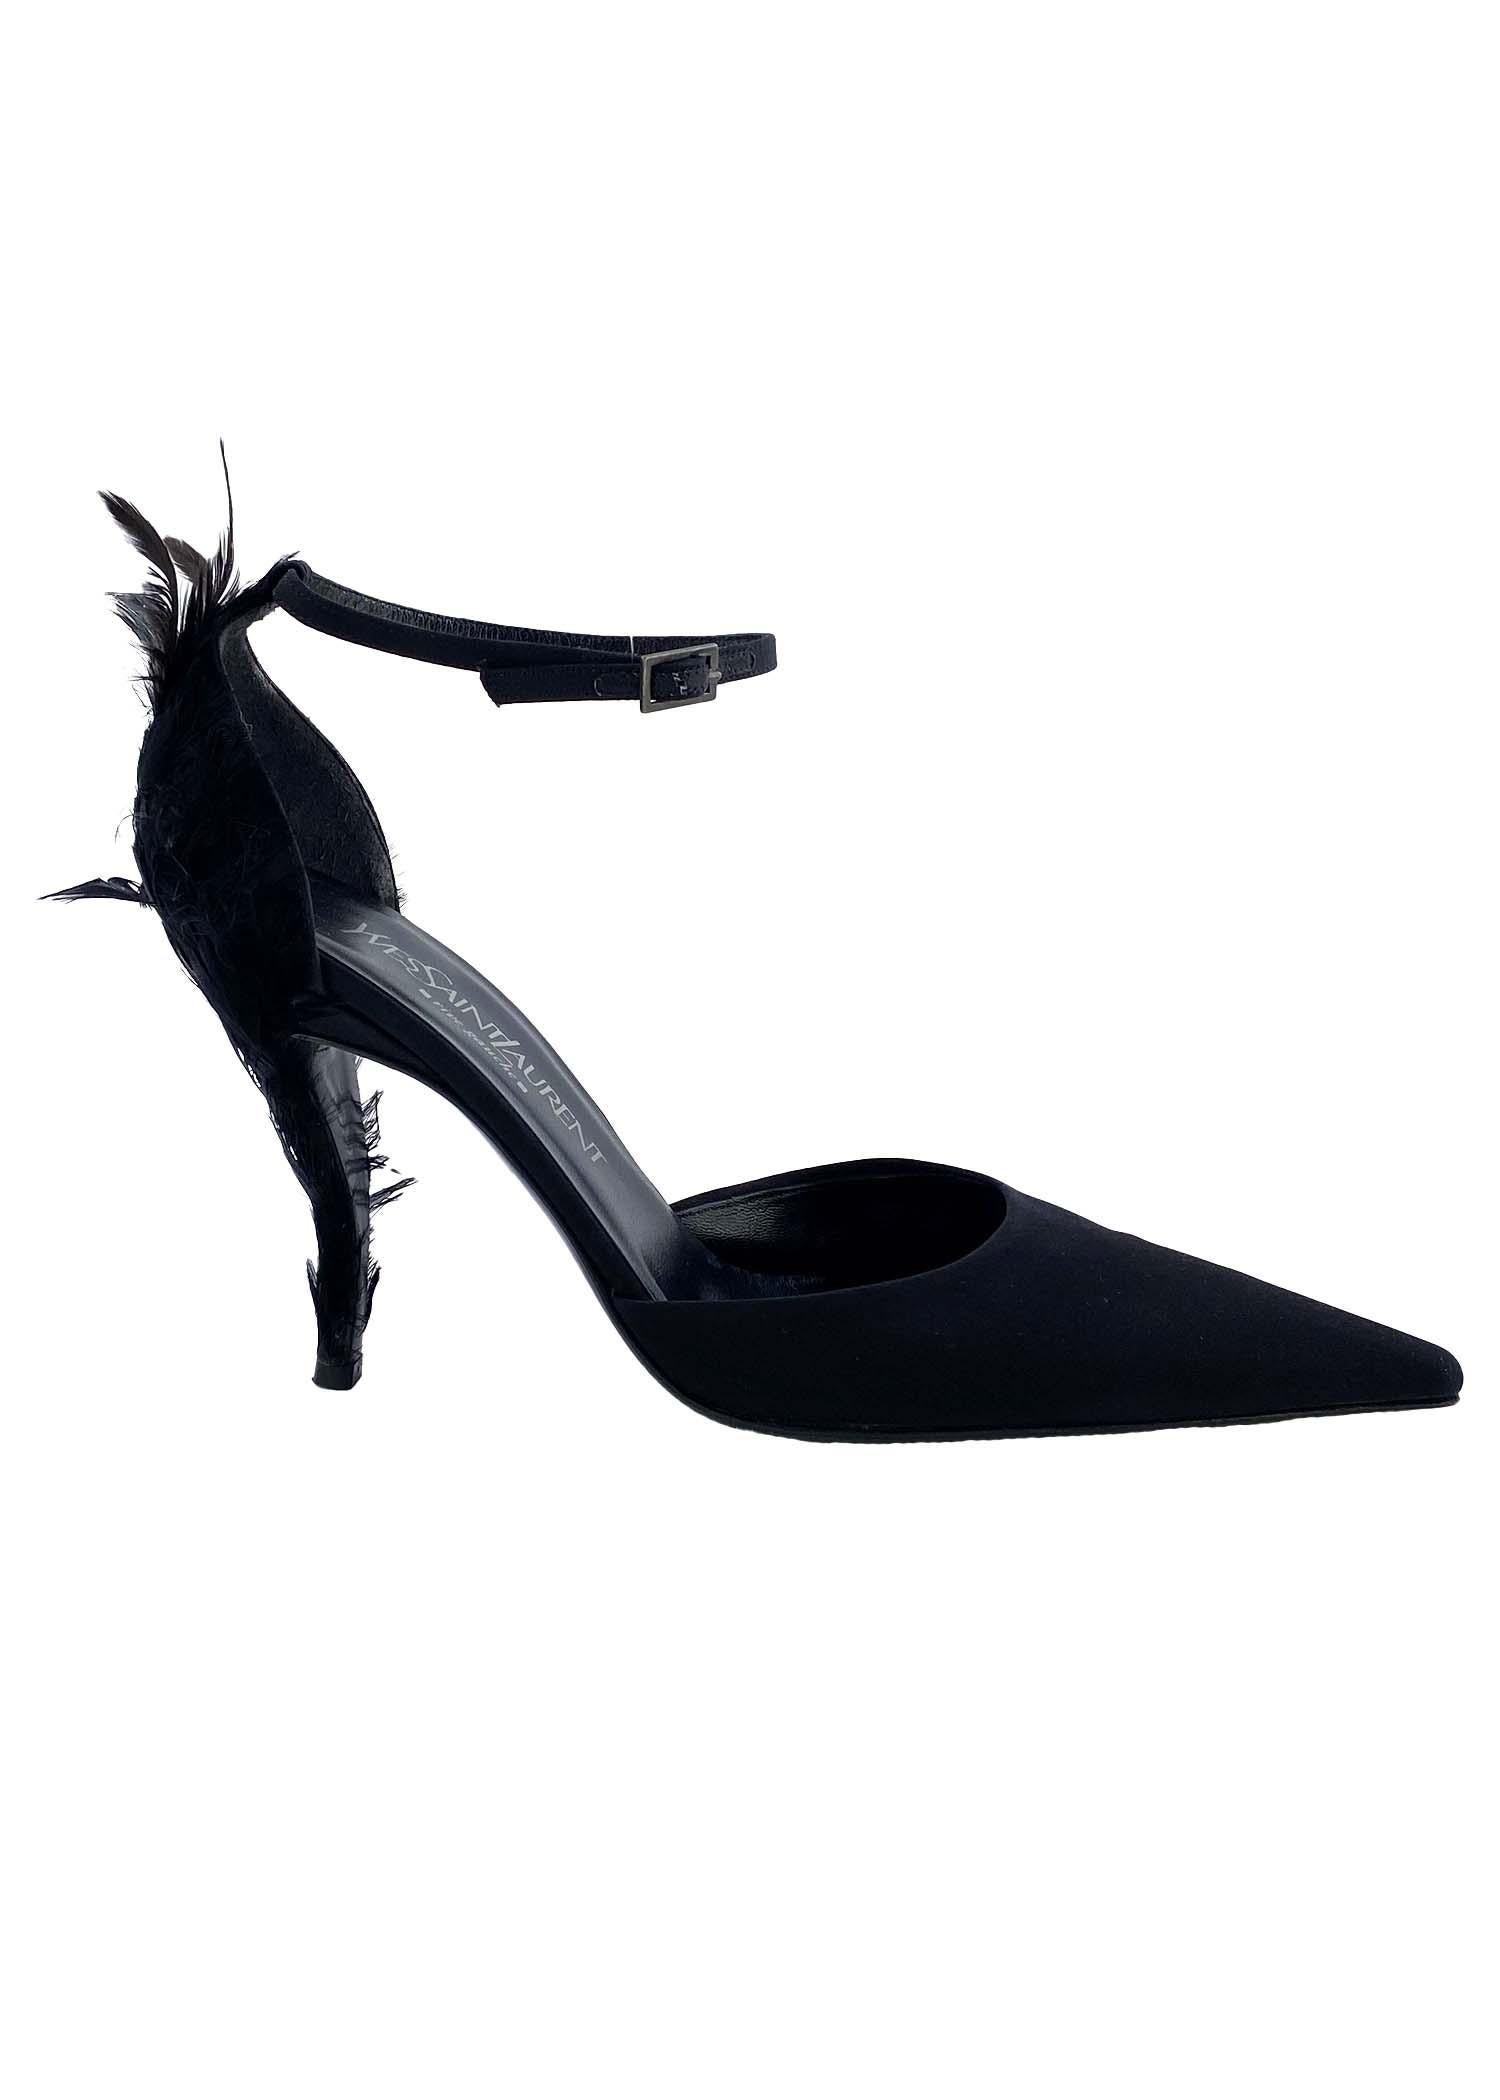 Presenting a stunning pair of Yves Saint Laurent Rive Gauche pointed pumps with feather details, designed by Tom Ford. This pair of heels were created for the Spring/Summer 2001 collection which was Ford's first for YSL and featured many looks with